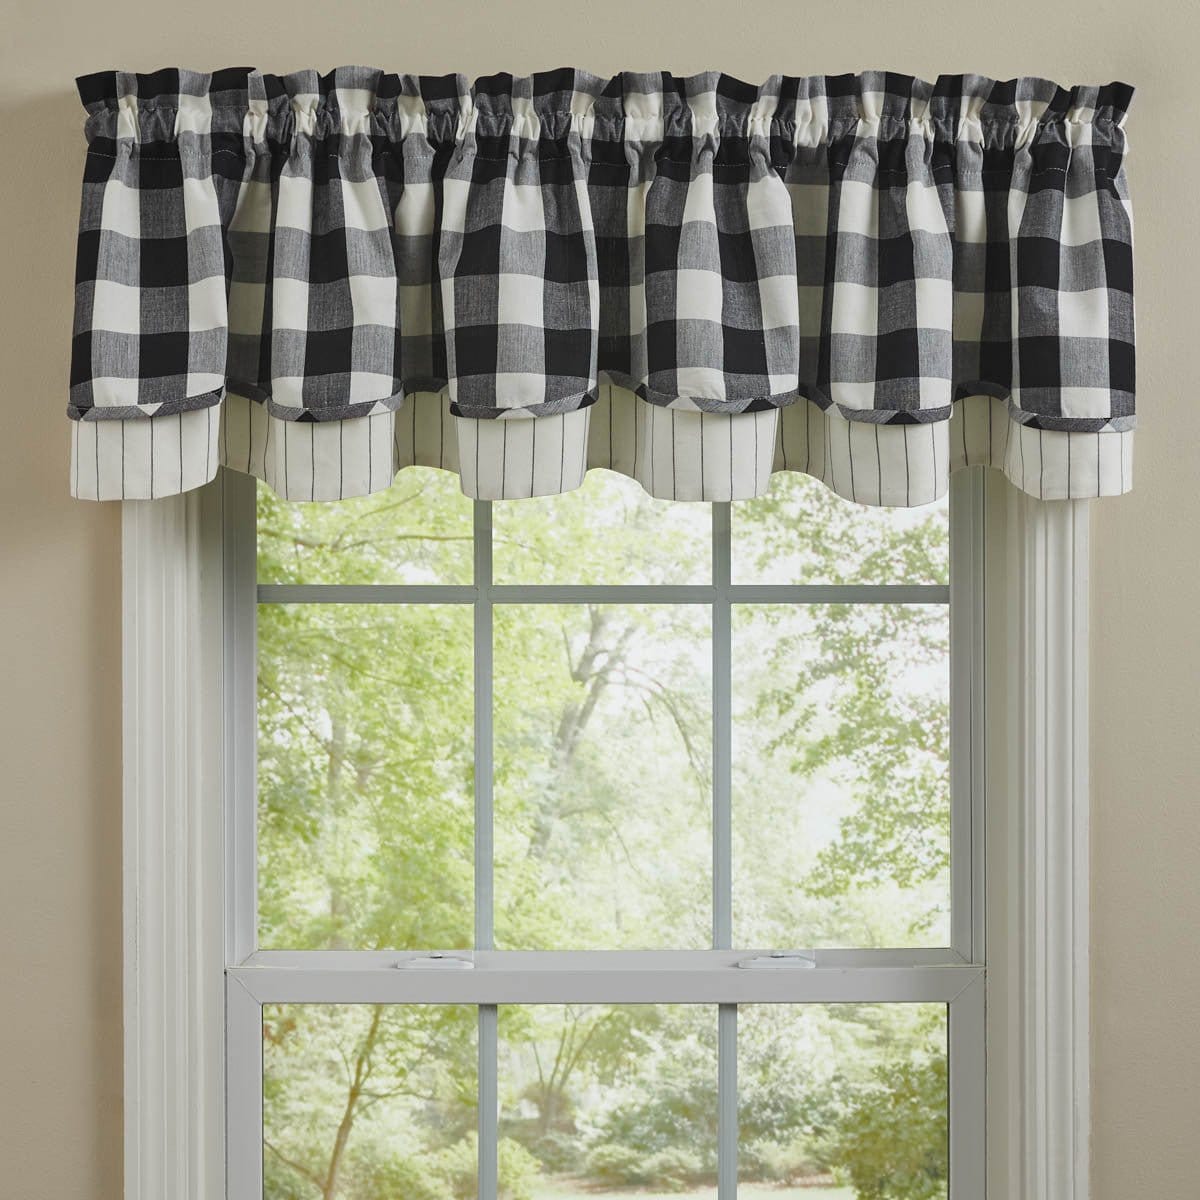 Wicklow Check in Black & Cream Layered Valance Lined-Park Designs-The Village Merchant